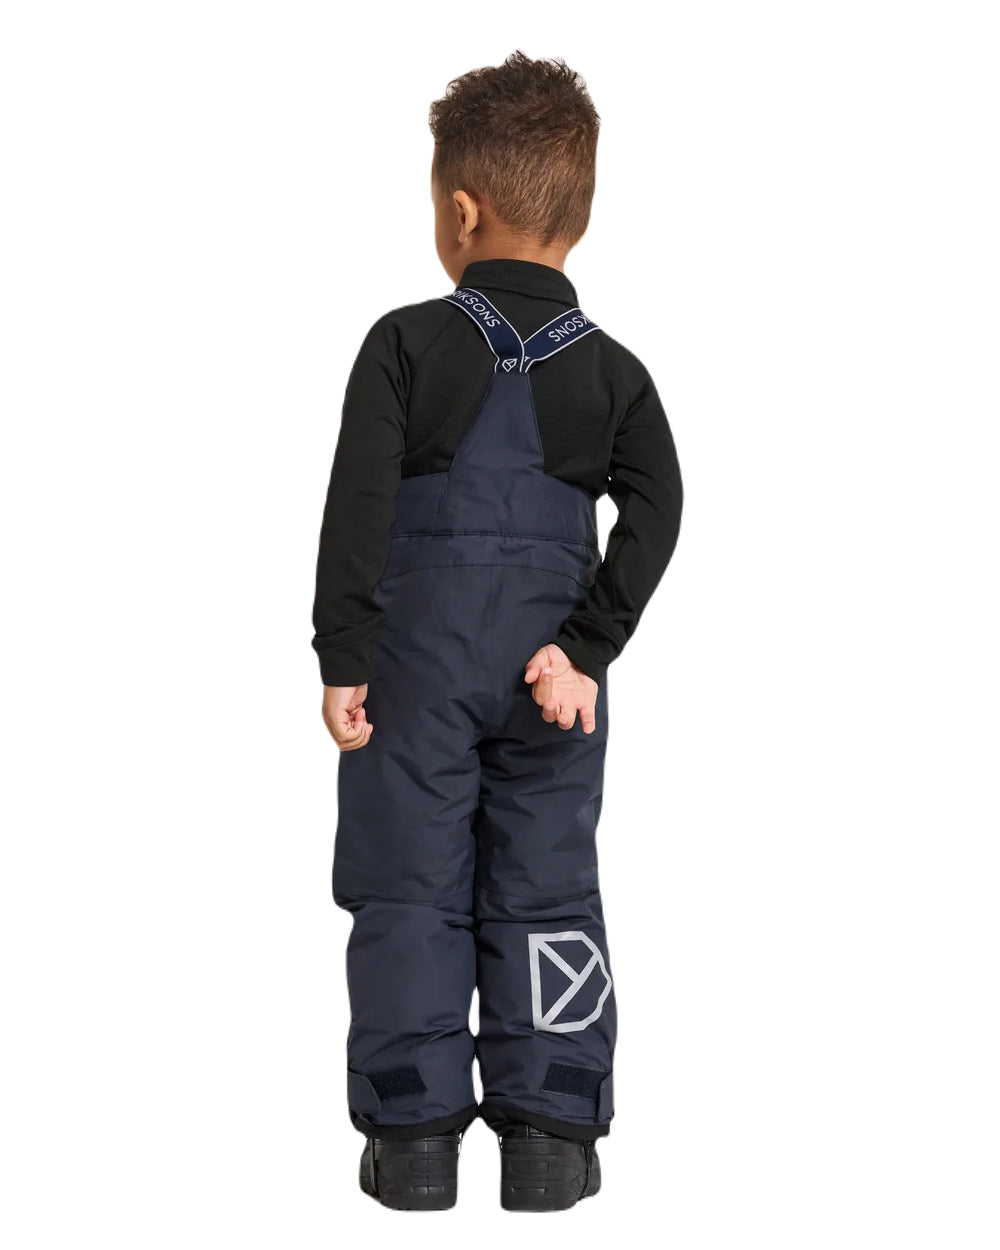 Navy Coloured Didriksons Idre Childrens Pants Pants Galon On A White Background 